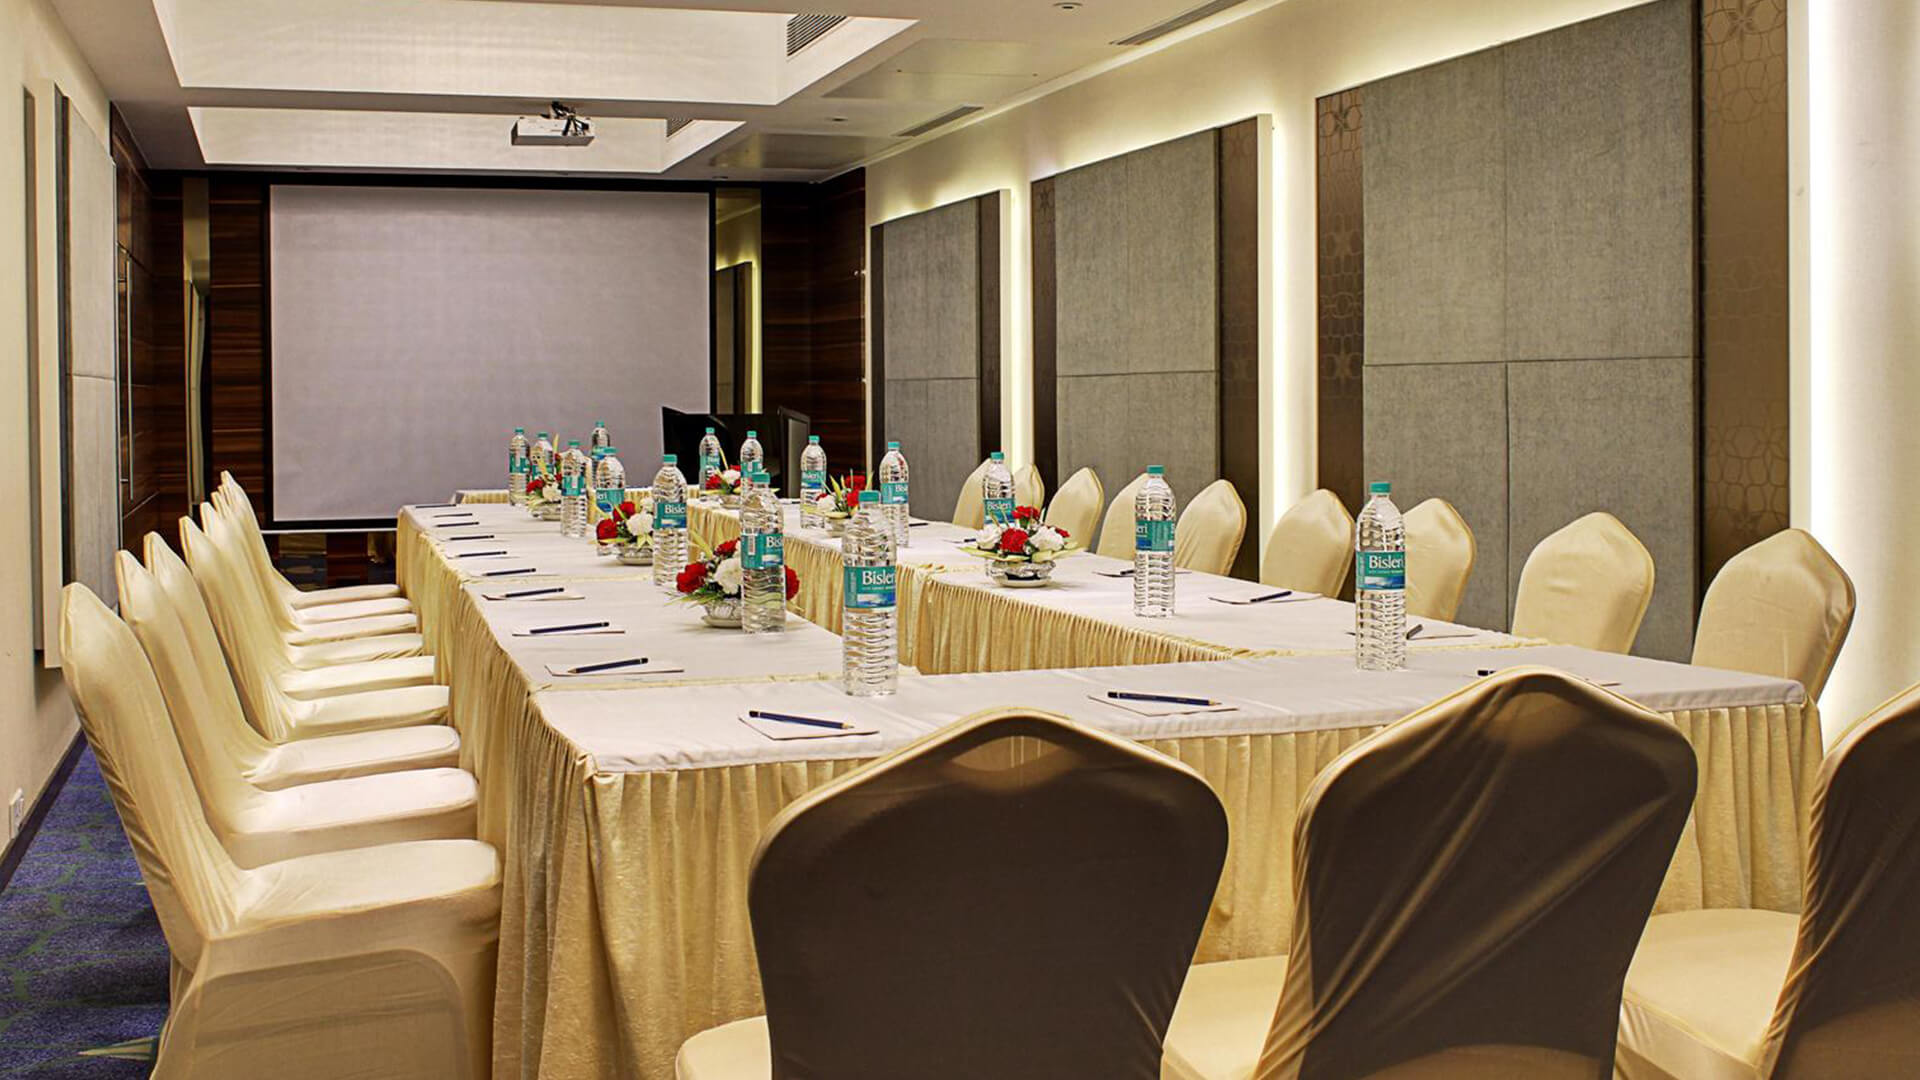 Conference in Mumbai central, Banquets in Mumbai central, Conference rooms in South Mumbai, Banquet halls in Mumbai central, The Sahil Hotel